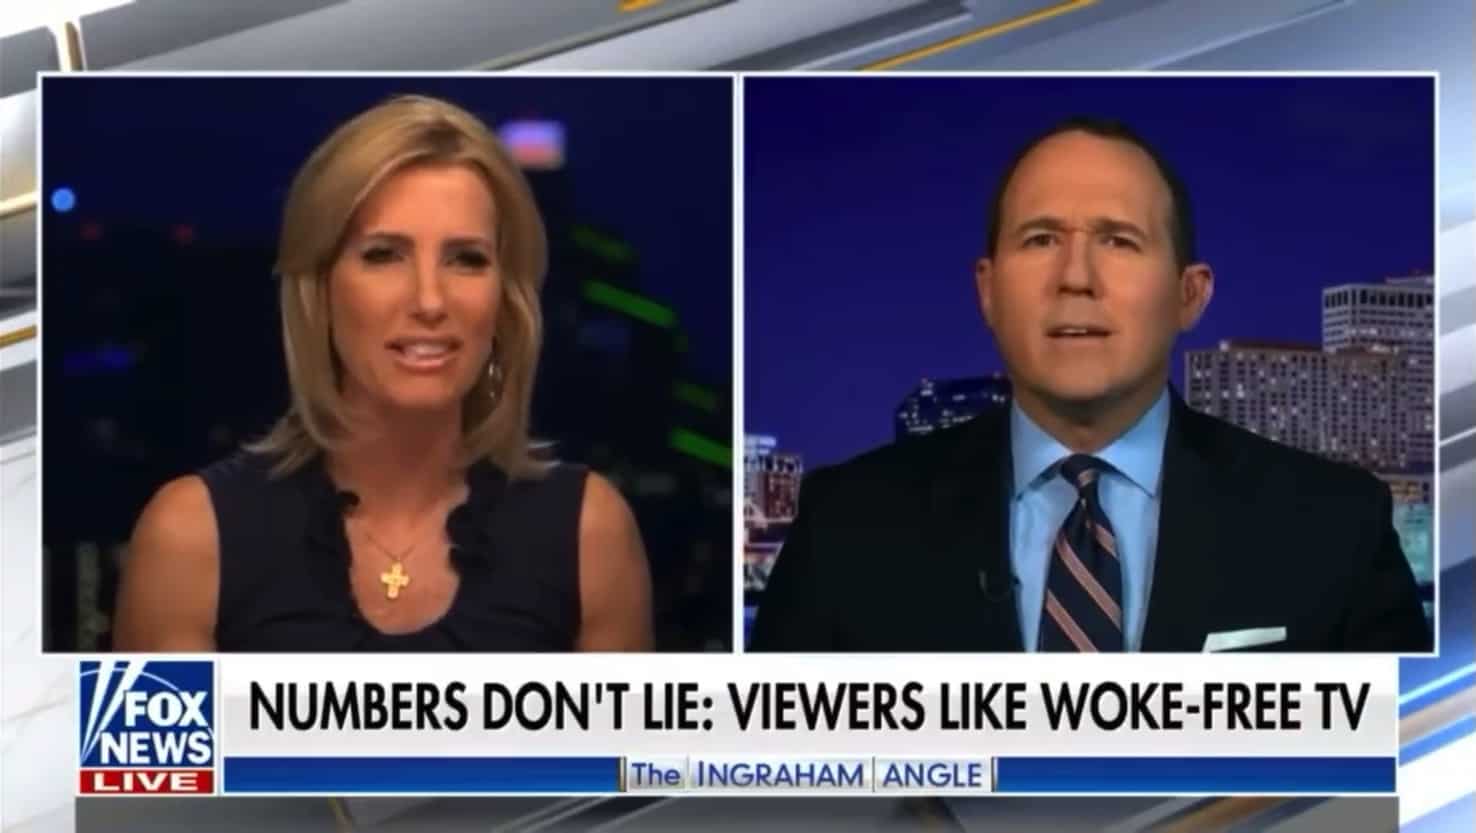 Watch: Fox News segment descends into chaos over ‘You’ confusion